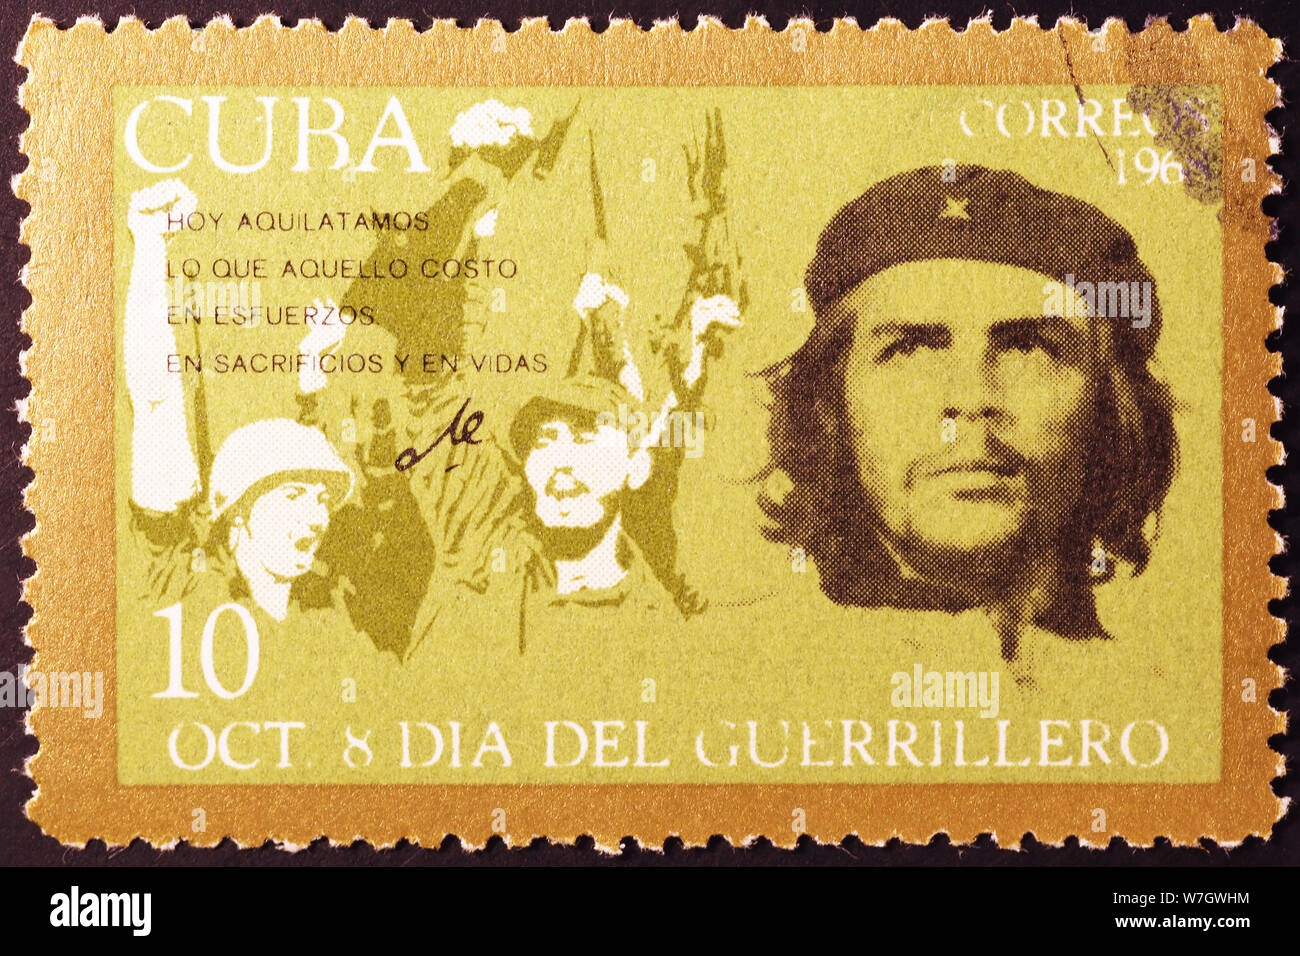 Che Guevara and guerrilleros on cuban postage stamp Stock Photo